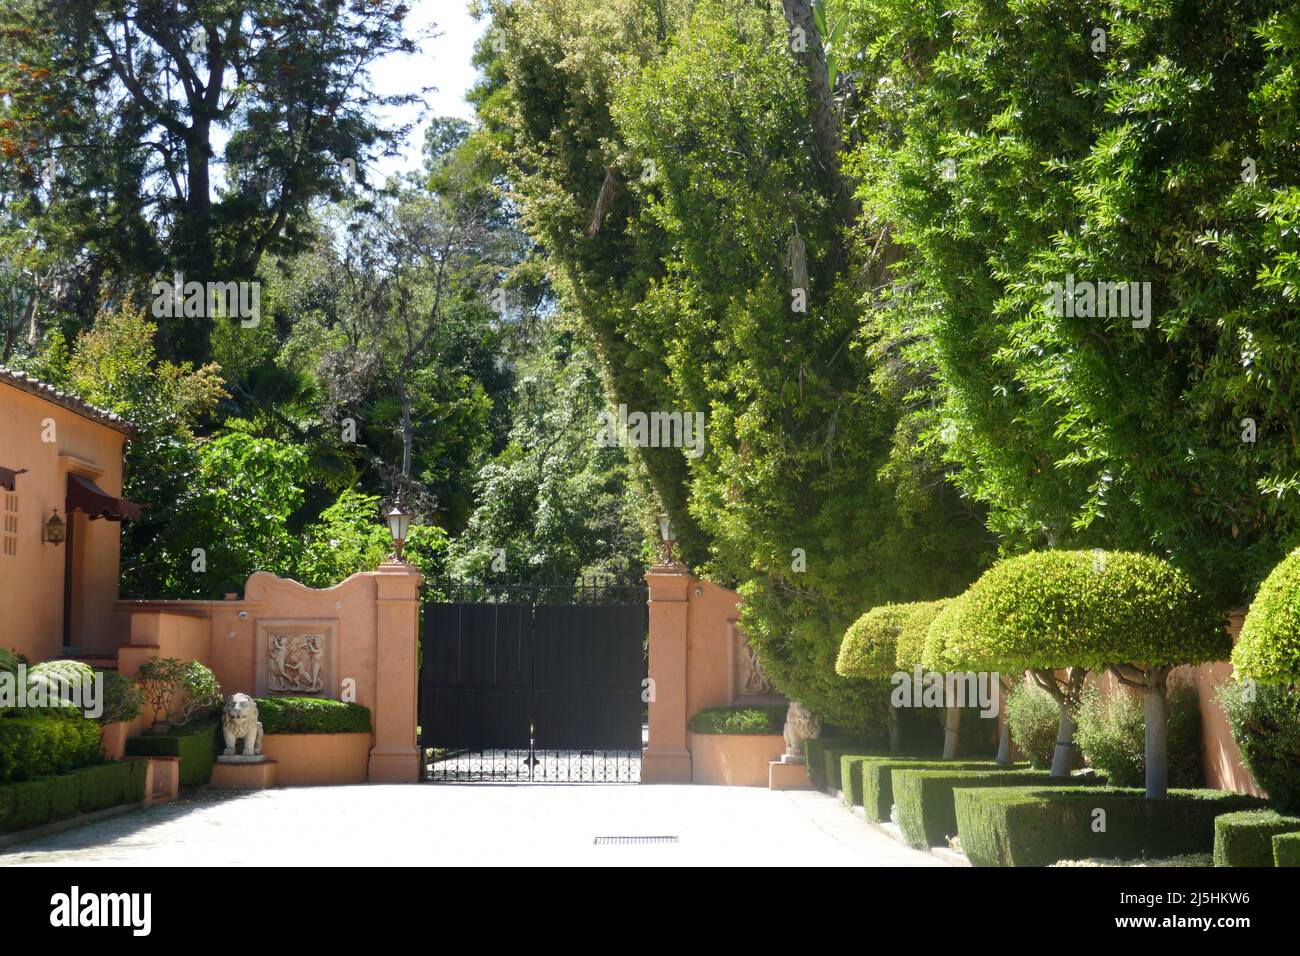 Beverly Hills, California, USA 15th April 2022 A general view of atmosphere of Actress Eleanor Boardman, Actor Horace Brown, Actress Marion Davies and William Randolph Hearst's Former Home/house at 1009 N. Beverly Drive on April 15, 2022 in Beverly Hills, California, USA. This Estate/Mansion was used in Filming The Godfather, The Bodyguard, The Jerk, Fletch, Into the Night Movies and Colbys, Mod Squad Charlie's Angels Television Series. Beyonce Filmed Black Is King Video here. John F. Kennedy and Jackie Onassis honeymooned here. Photo by Barry King/Alamy Stock Photo Stock Photo